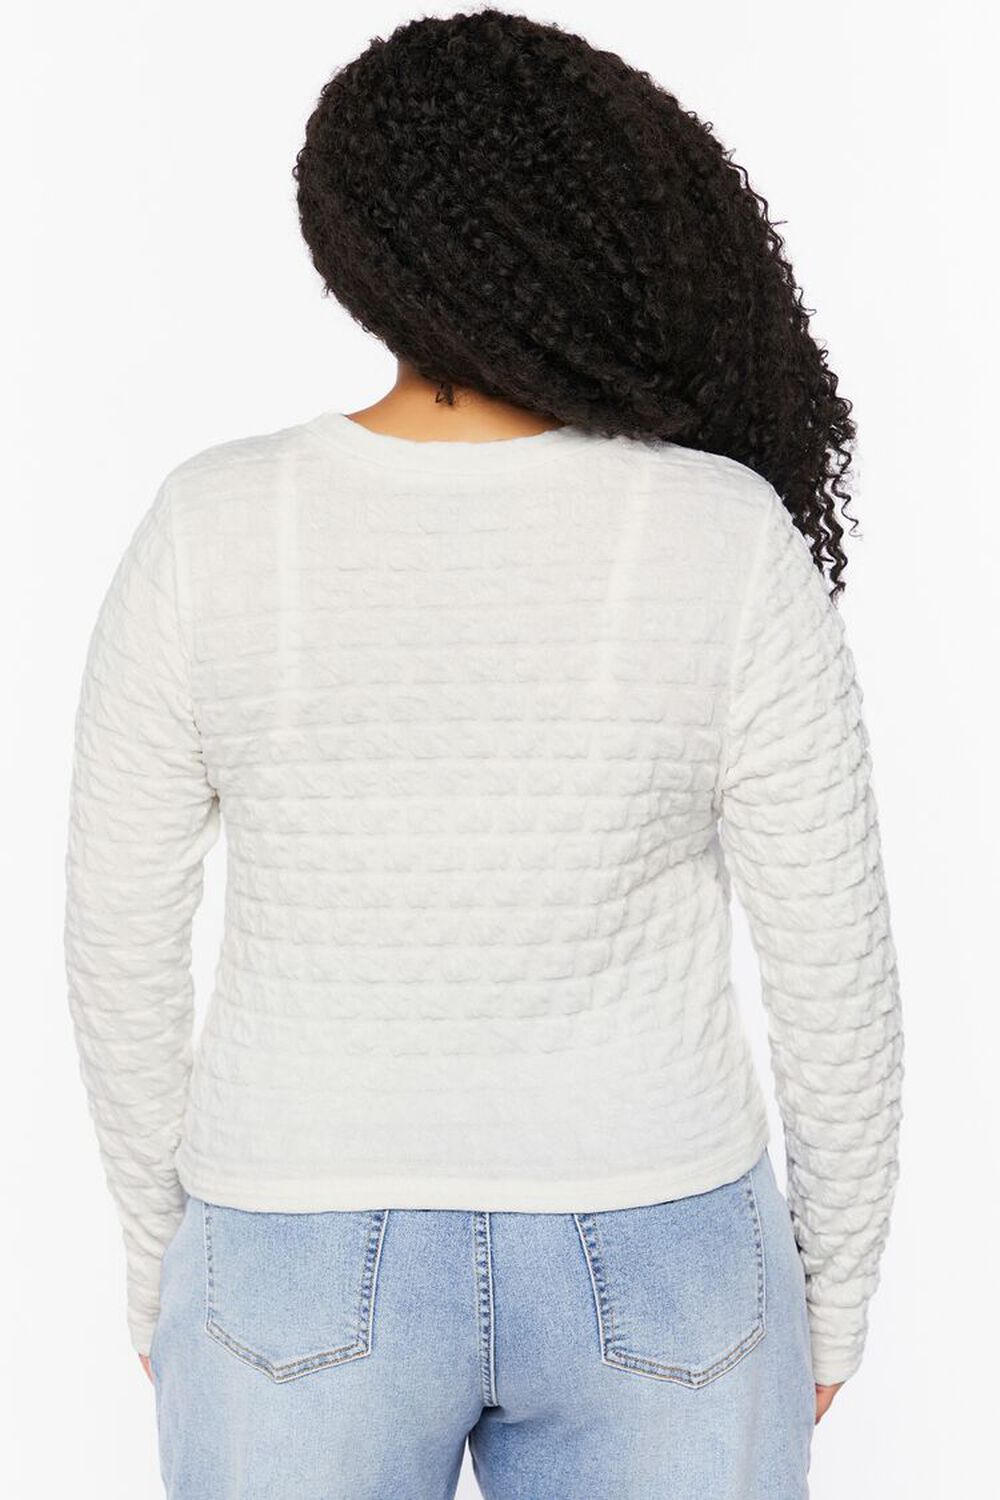 Plus Size Textured Long-Sleeve Top, image 3